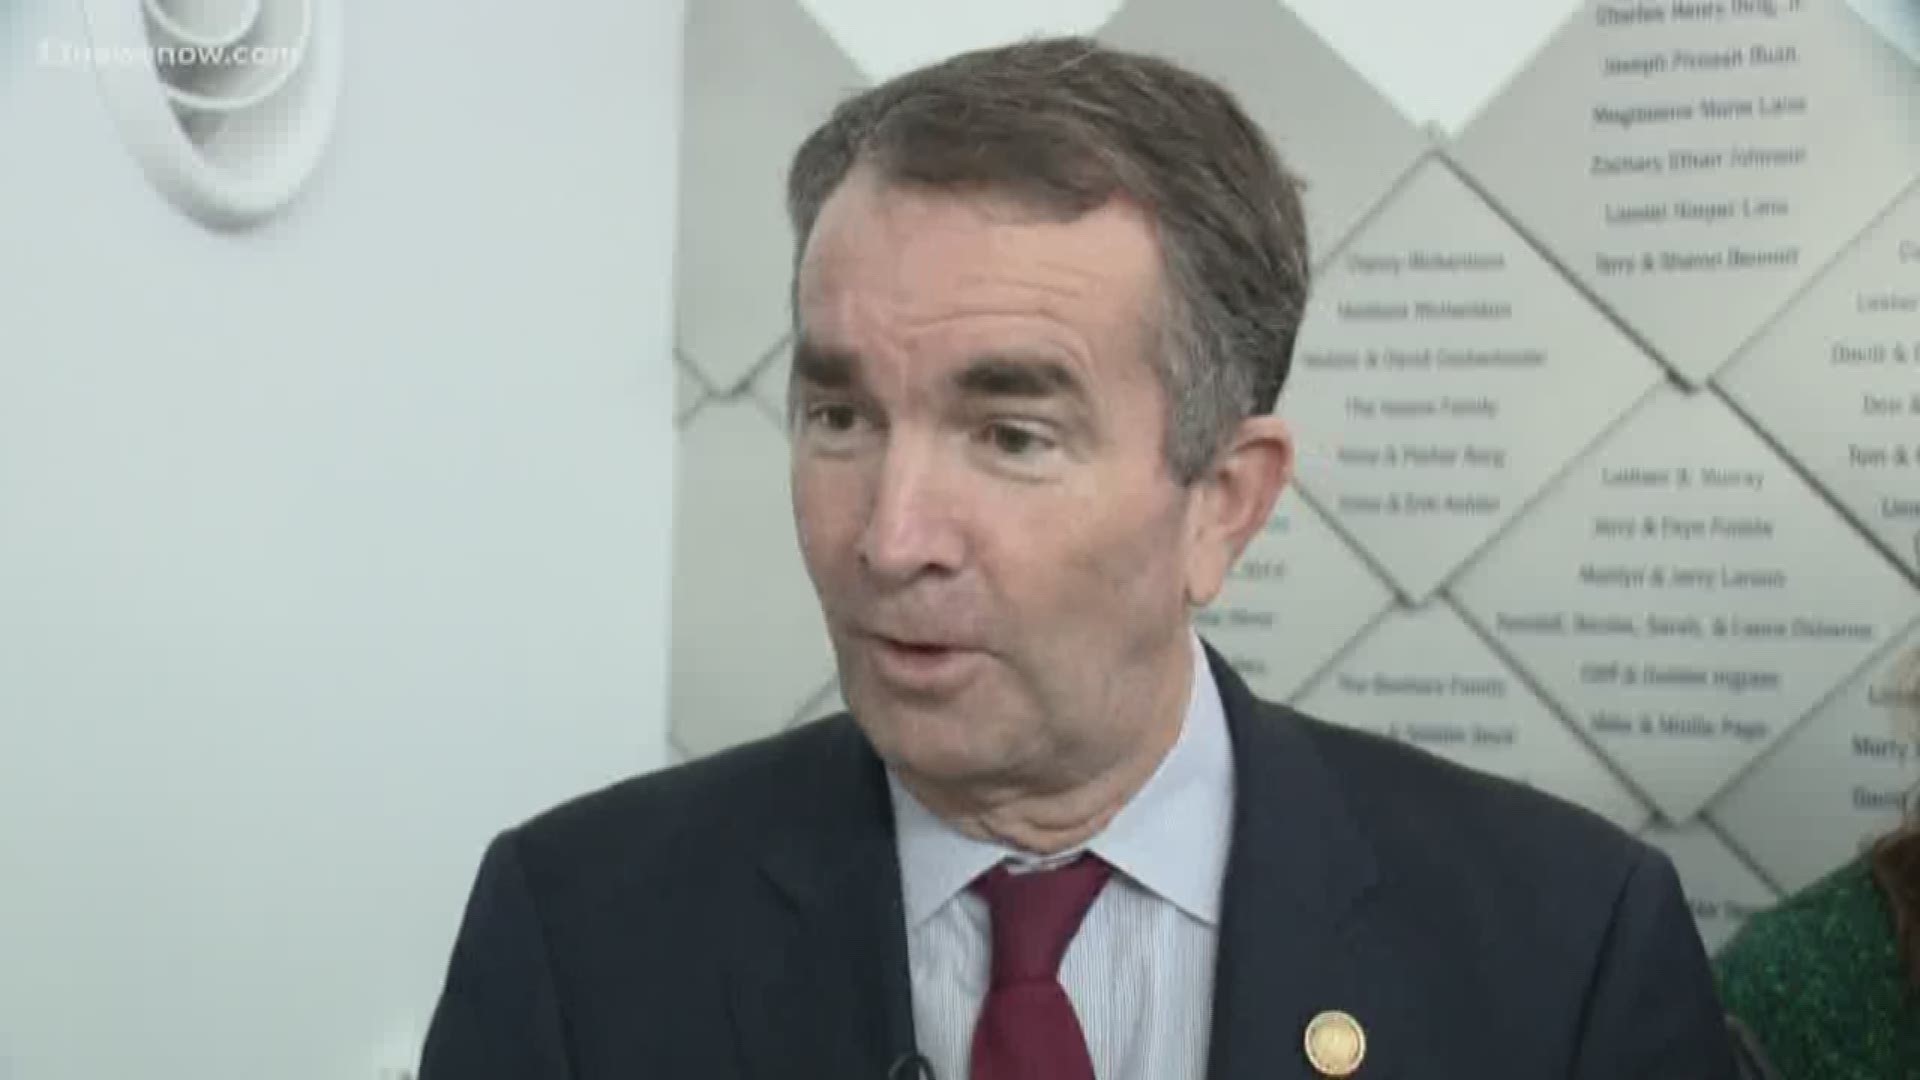 Northam stressed today: he supports the second amendment and he’s not taking guns away from anyone. The intent of his gun reform is to save lives.